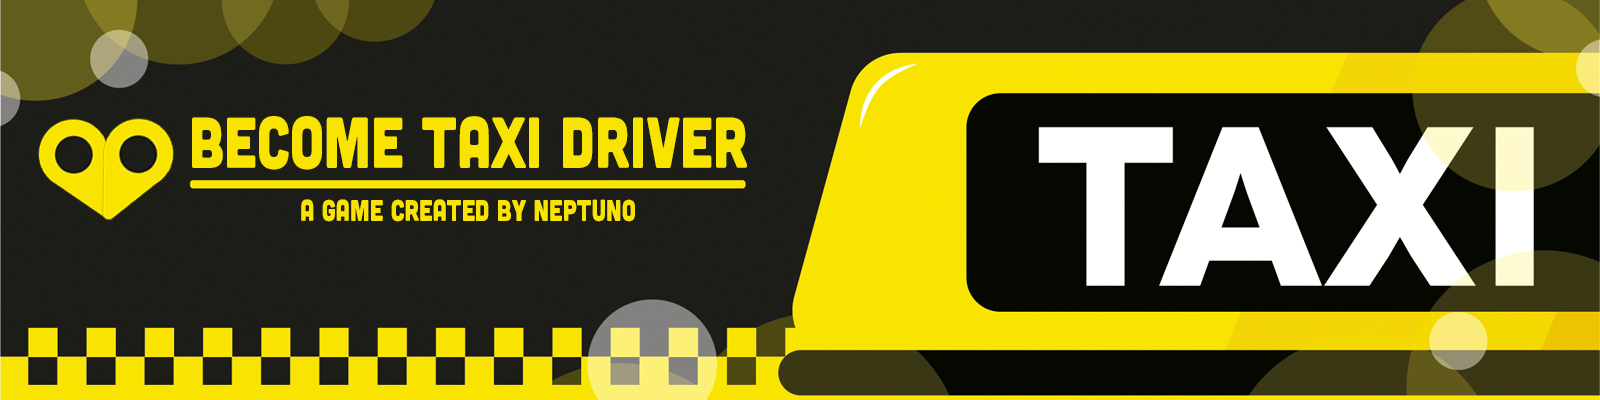 Become Taxi Driver poster